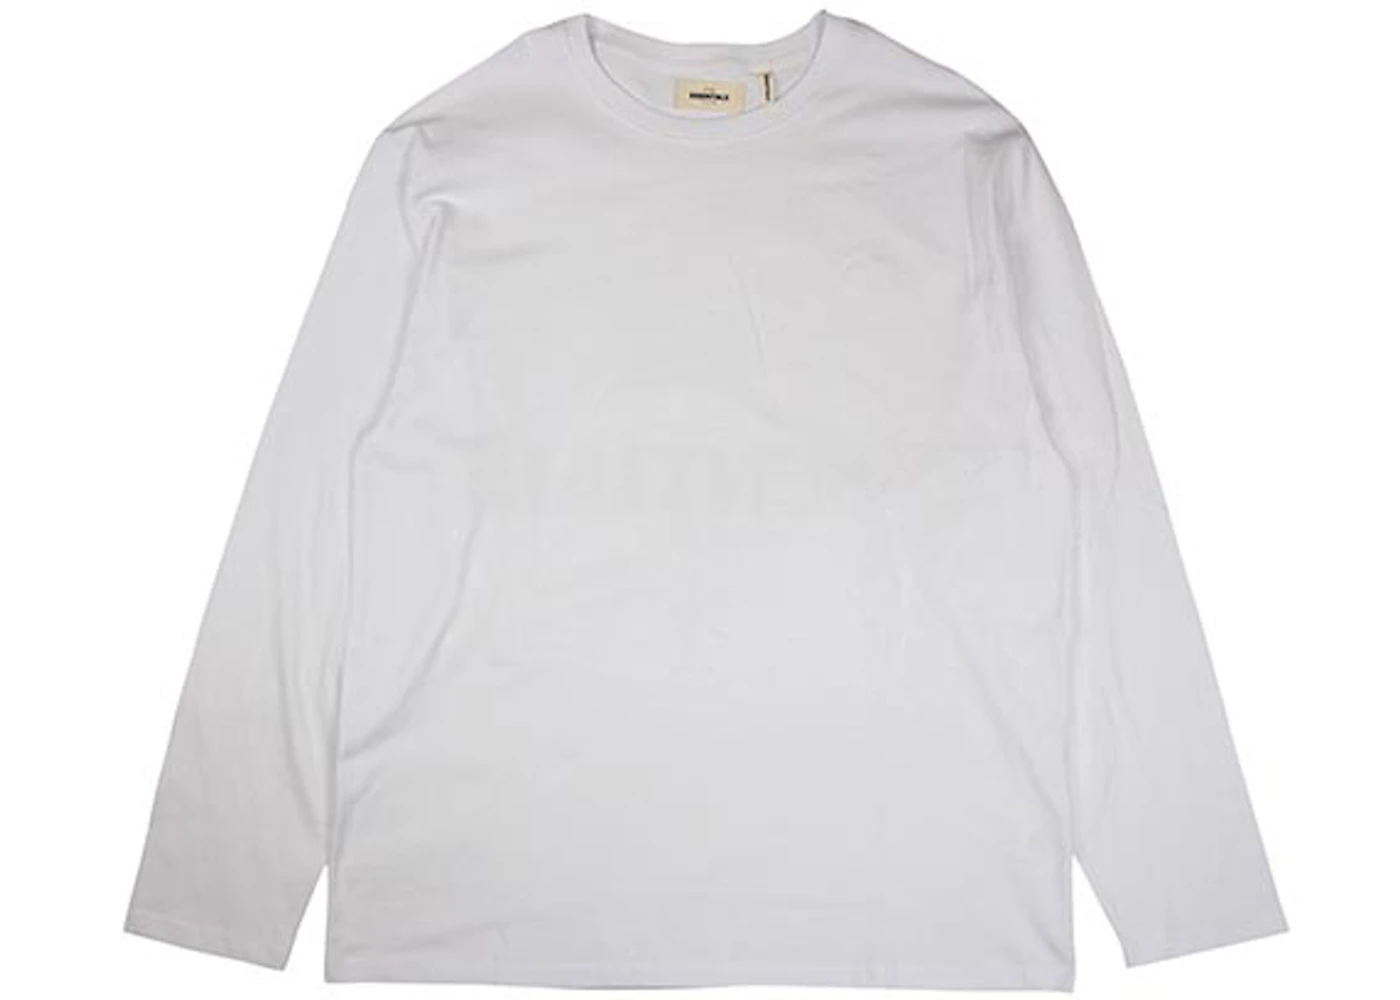 FEAR OF GOD Essentials Boxy Graphic Long Sleeve T-Shirt White